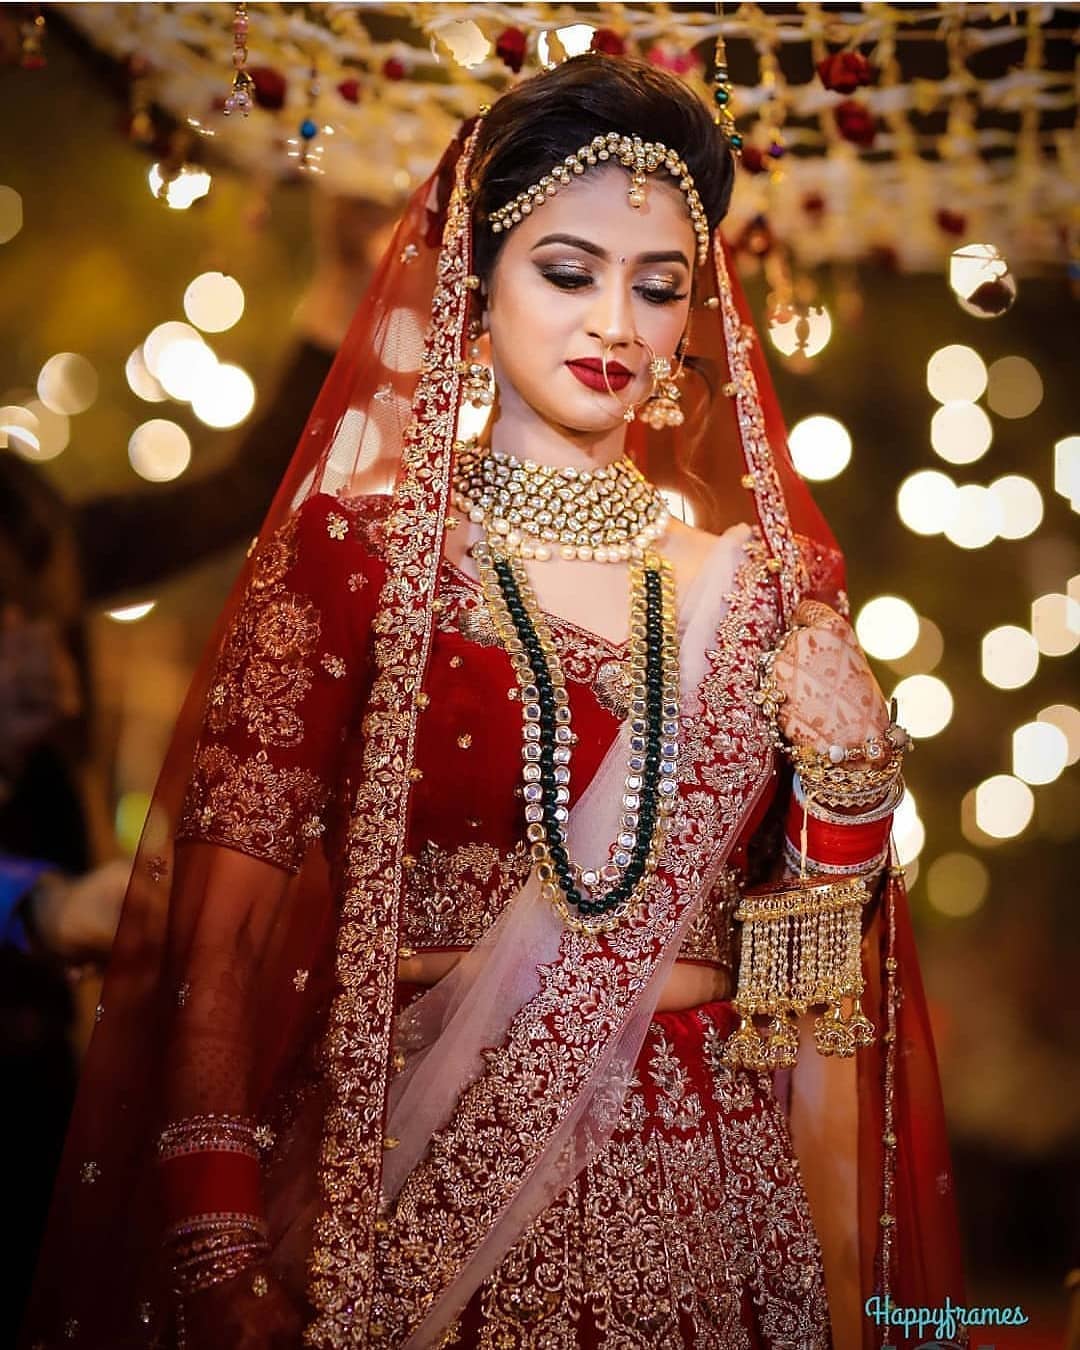 Flawless base: Best Bridal Makeup Inspirations to bring out Diva in You